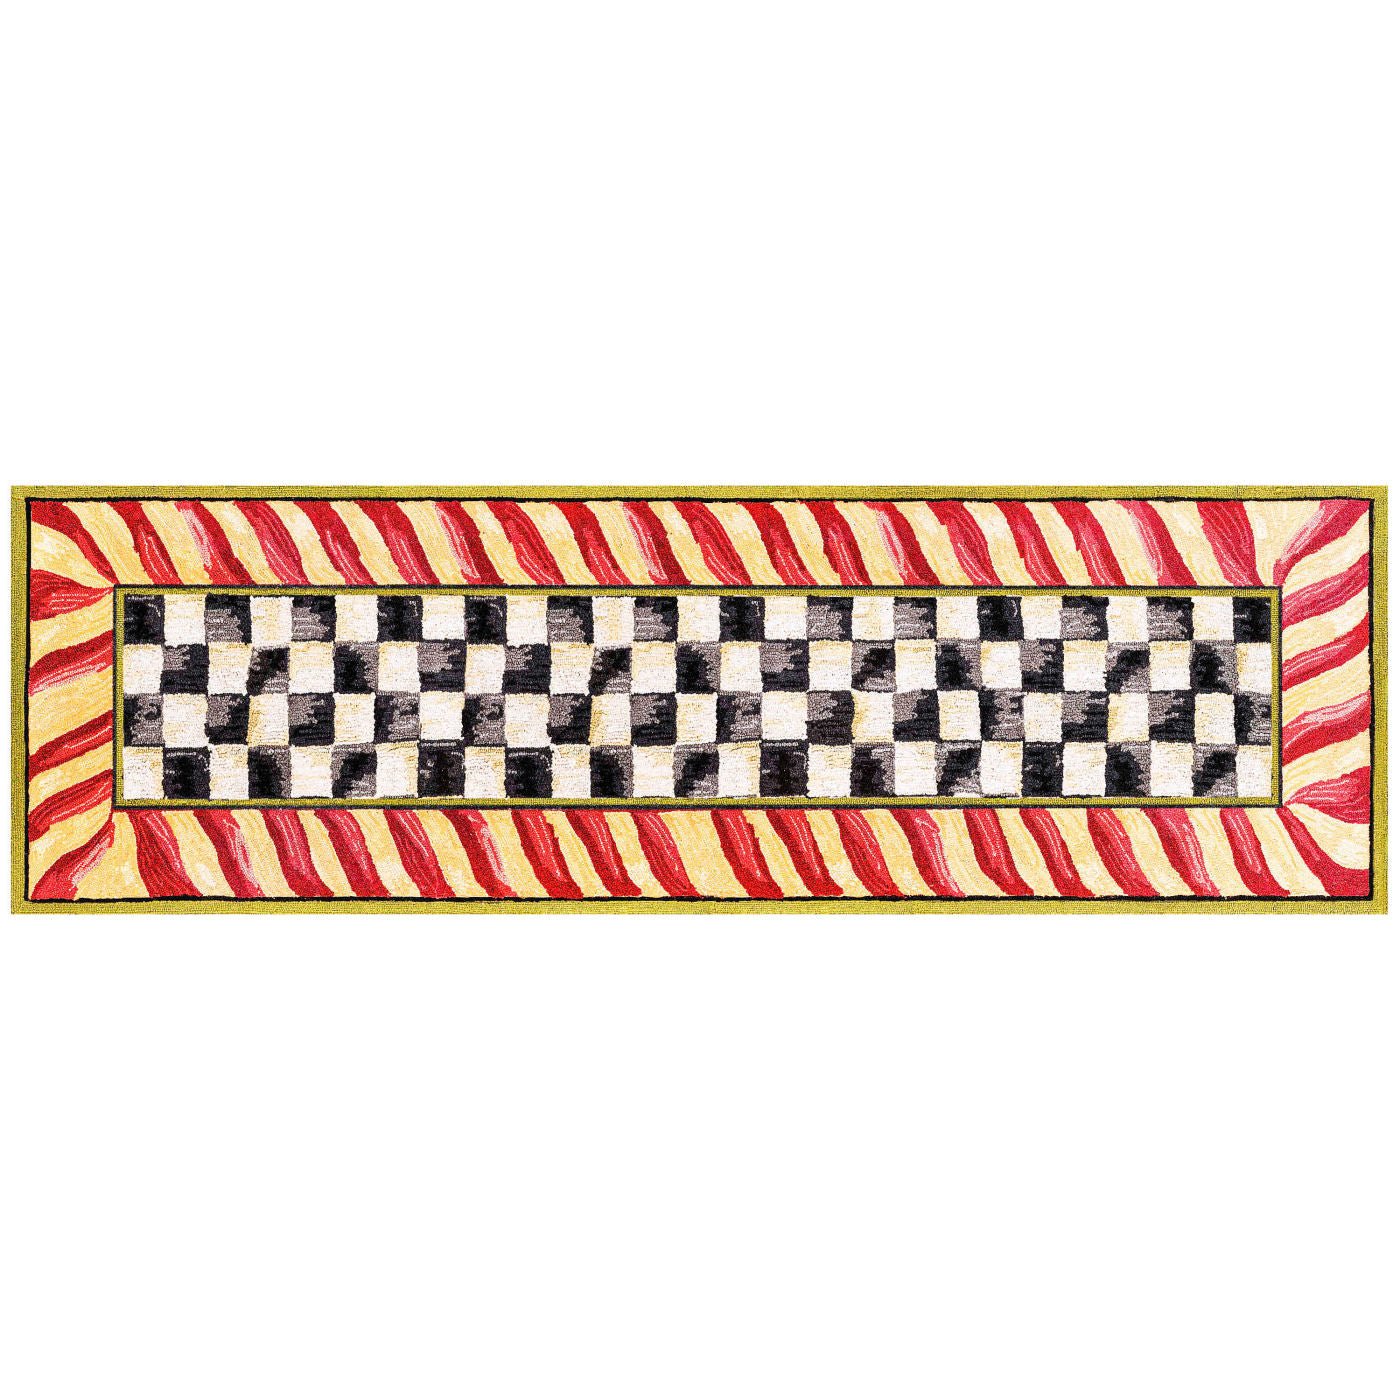 Courtly Check Red & Gold 76.2 x 243.84cm Washable Runner Rug - |VESIMI Design|